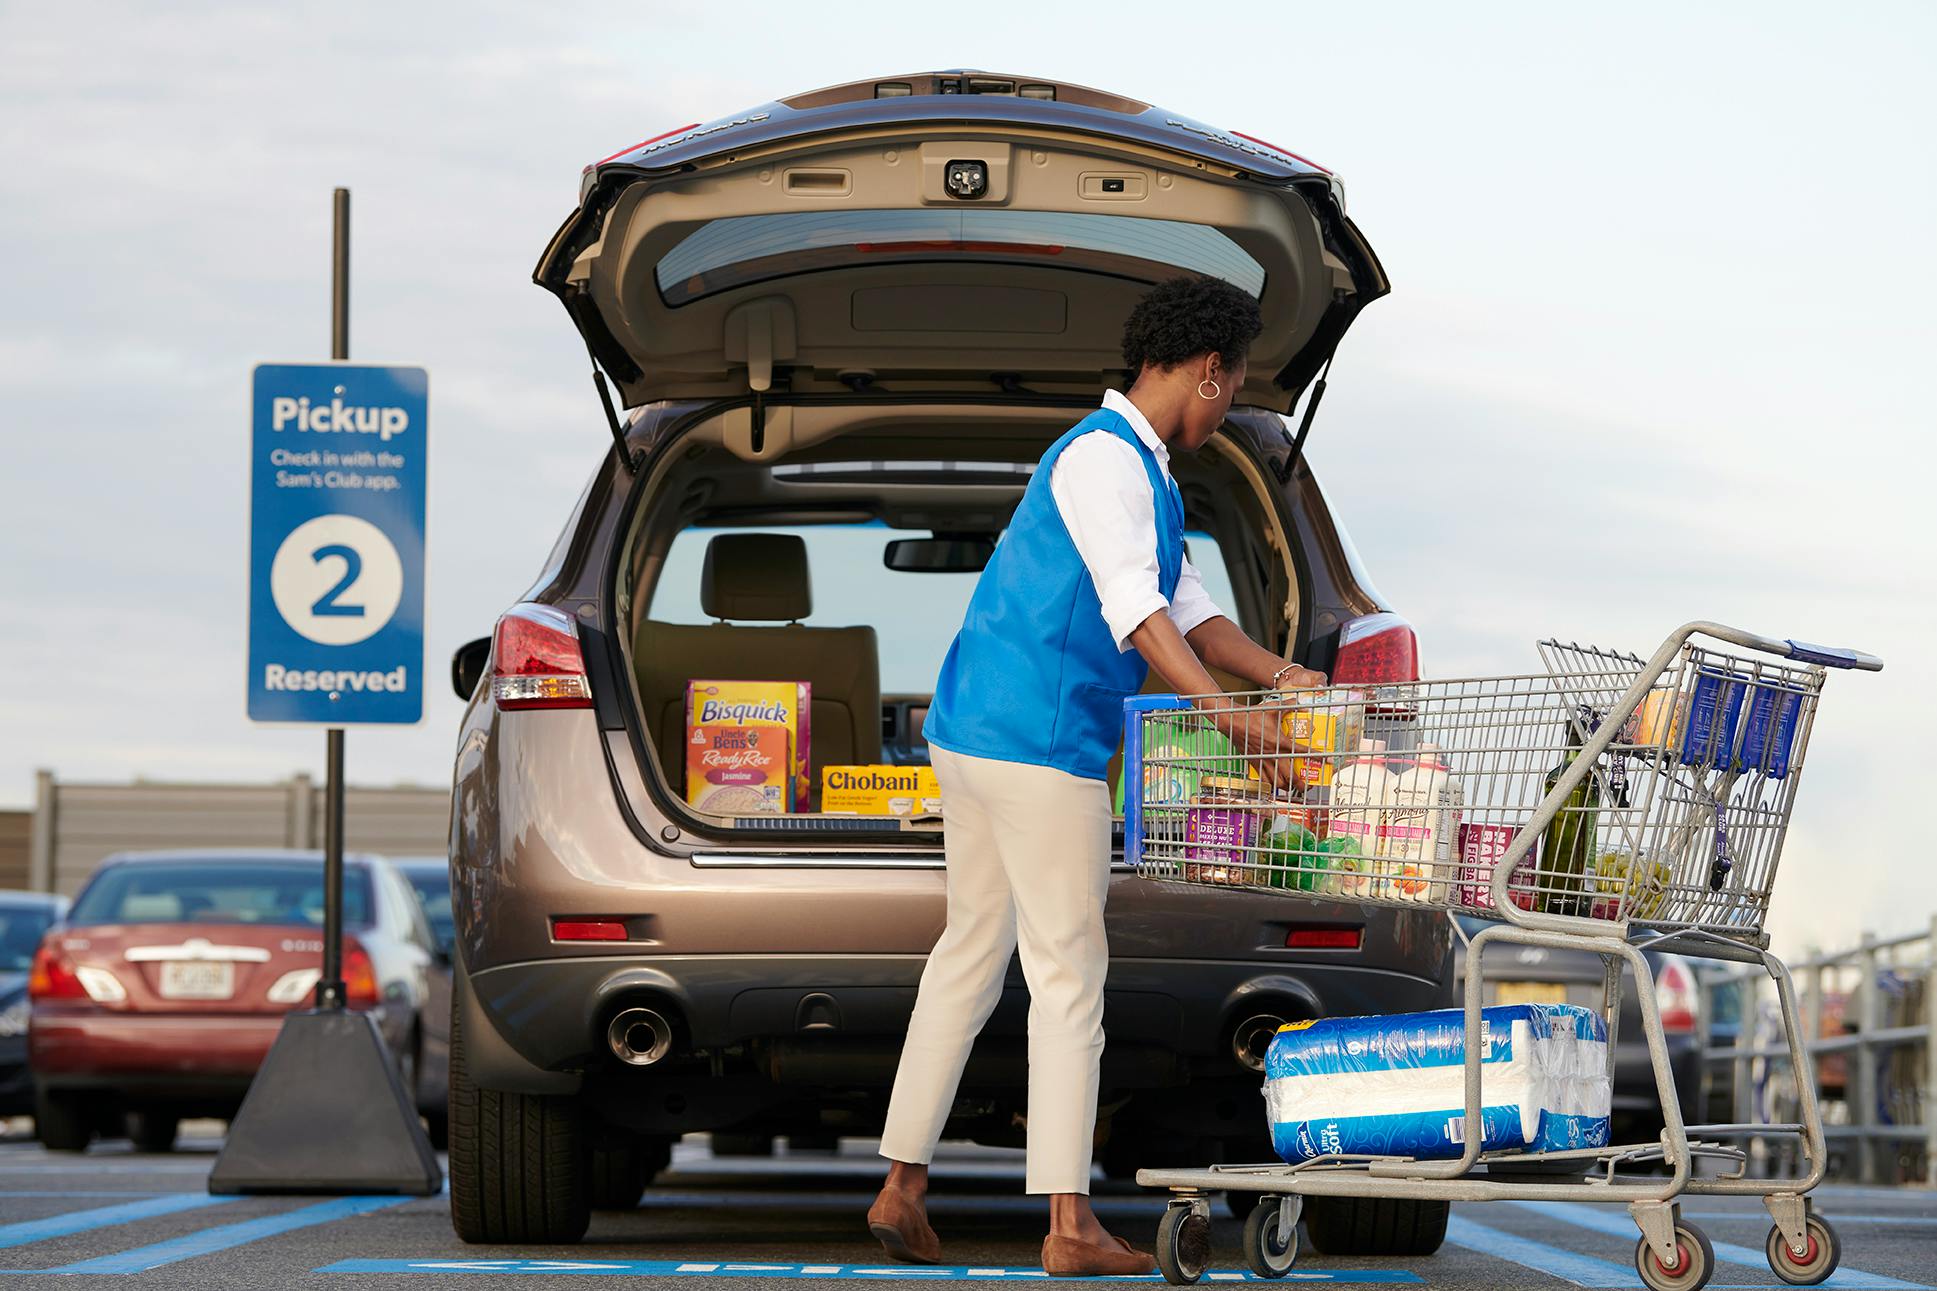 A Sam's Club employee packing groceries into the trunk of a vehicle that is parked in the Curbside pickup parking spot outside of Sam's Club.